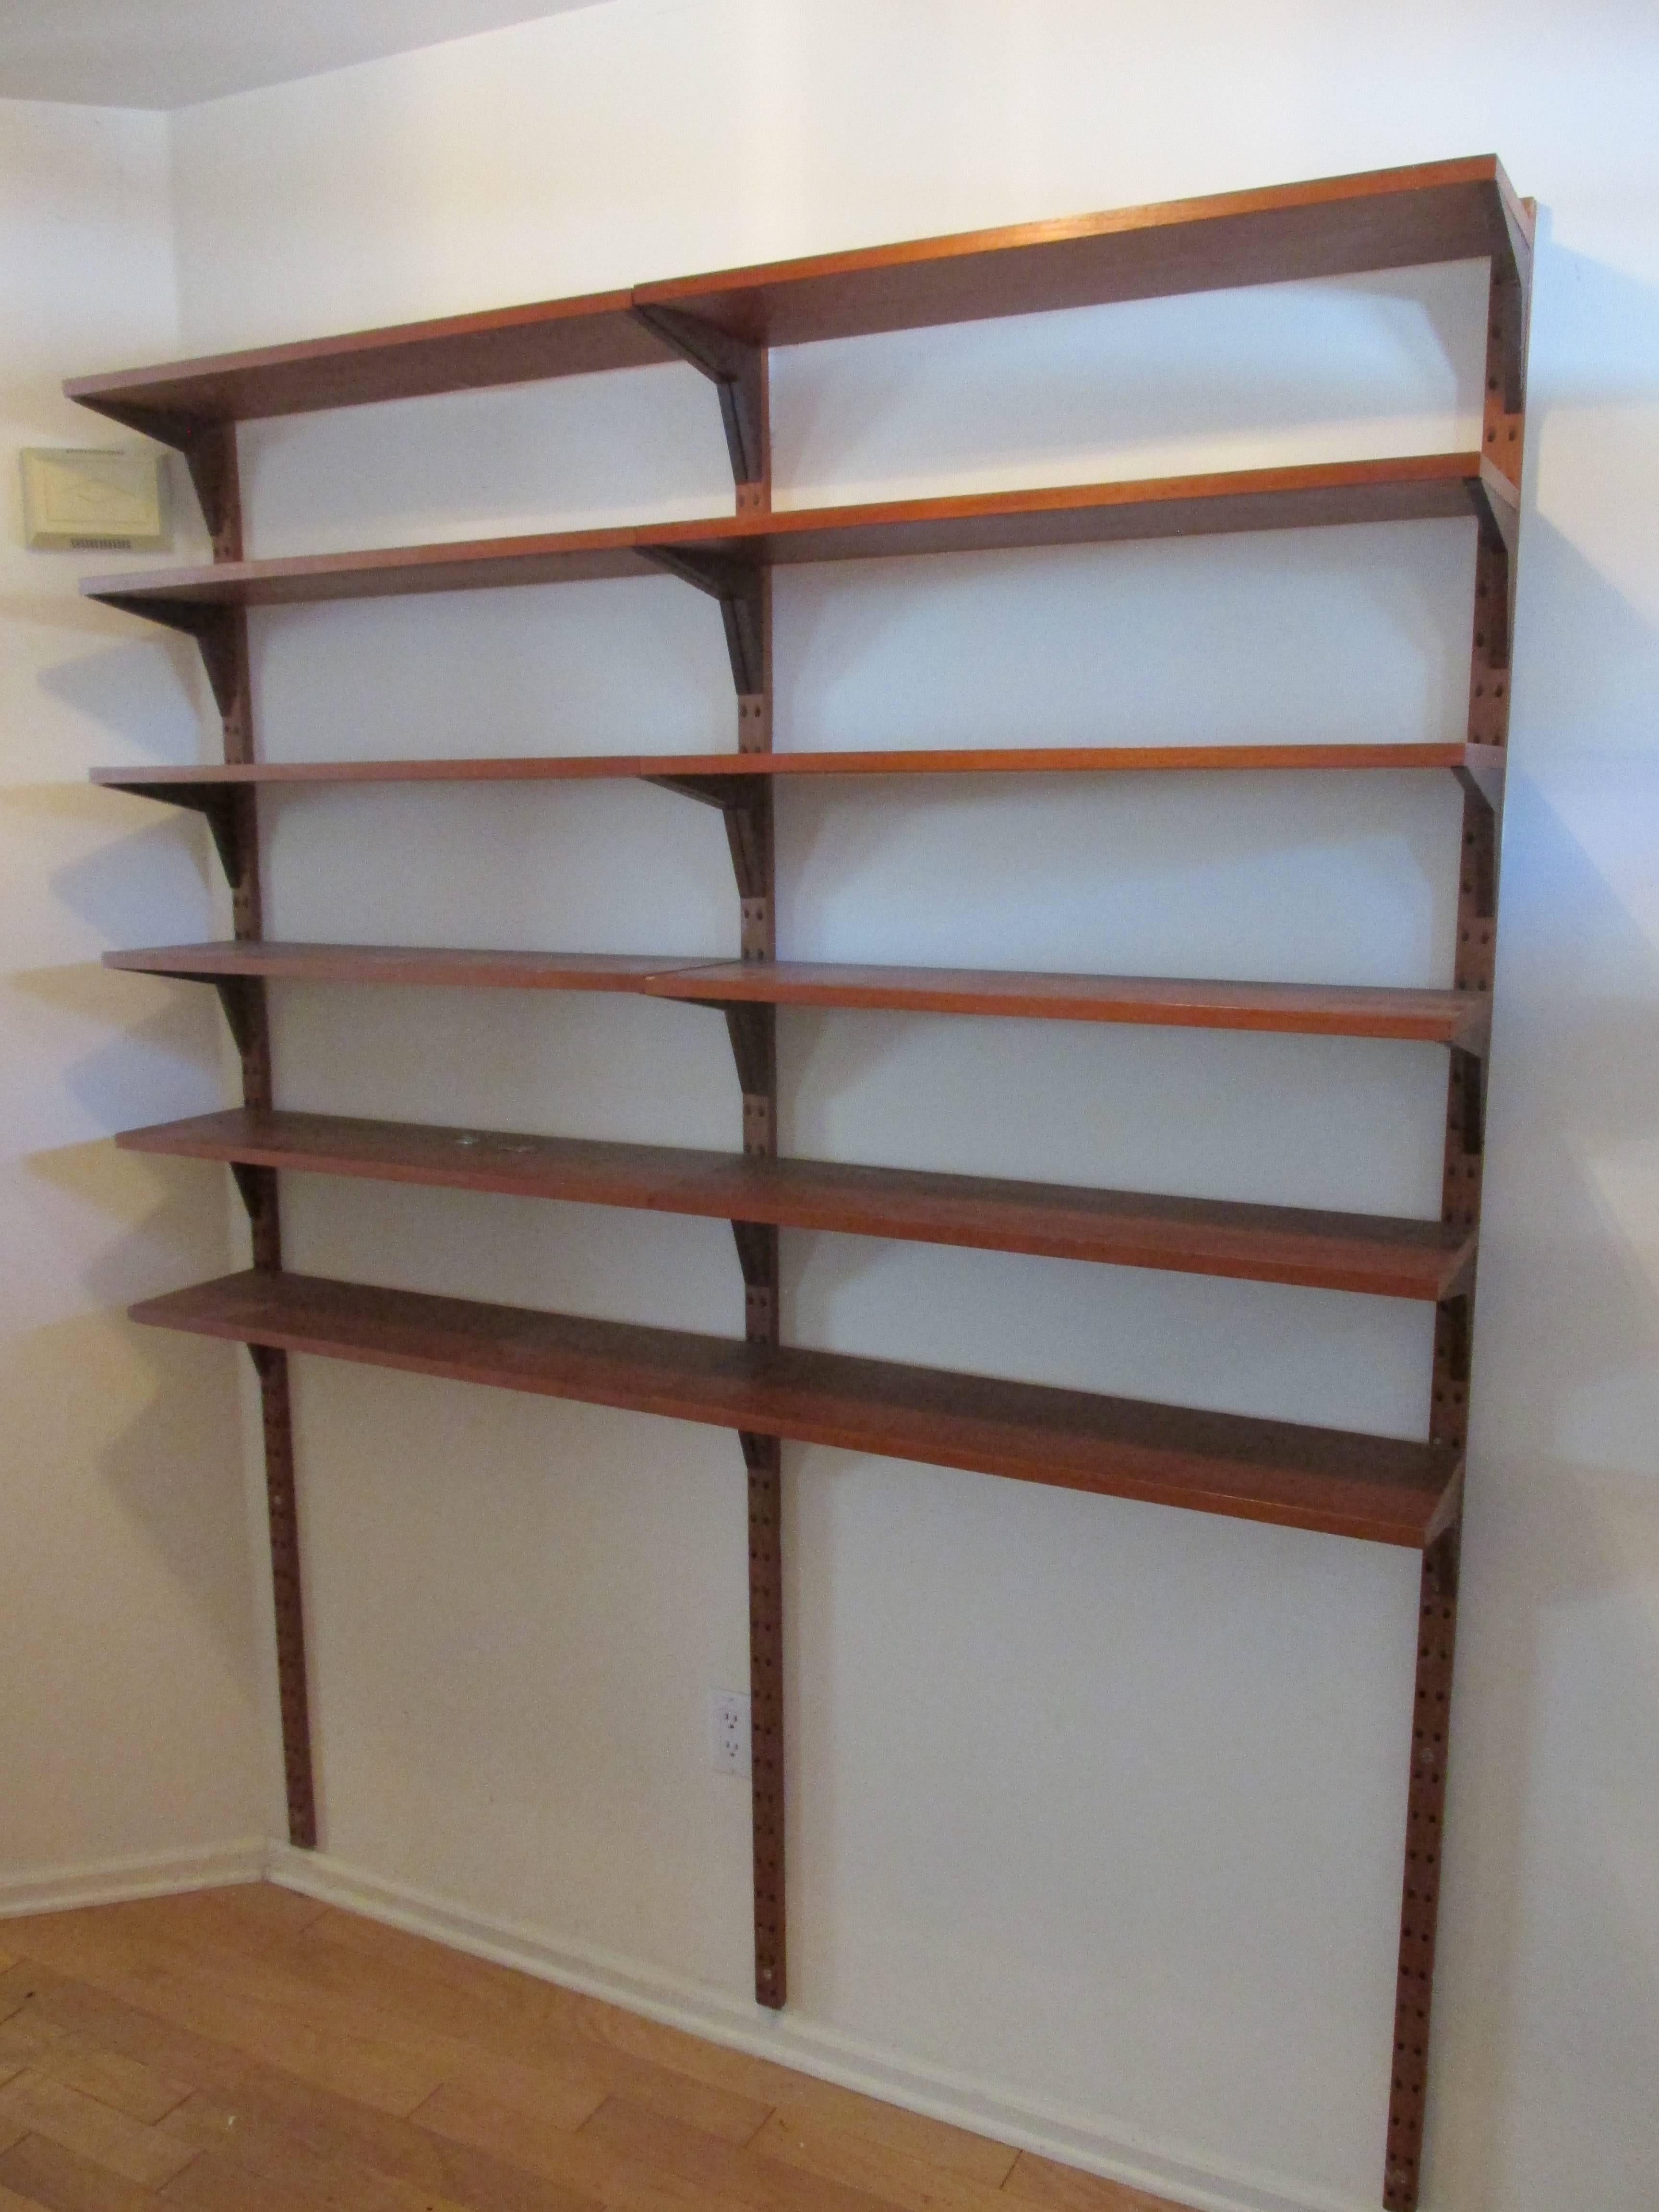 Poul Cadovius shelving unit in teak with 16 shelves each 31.5 x 8.75 deep supported by three large 79.5 inch stanchions and 32 brackets price as shown in primary picture is $2400. In addition to this unit there are available one large 31.5 x 18 deep